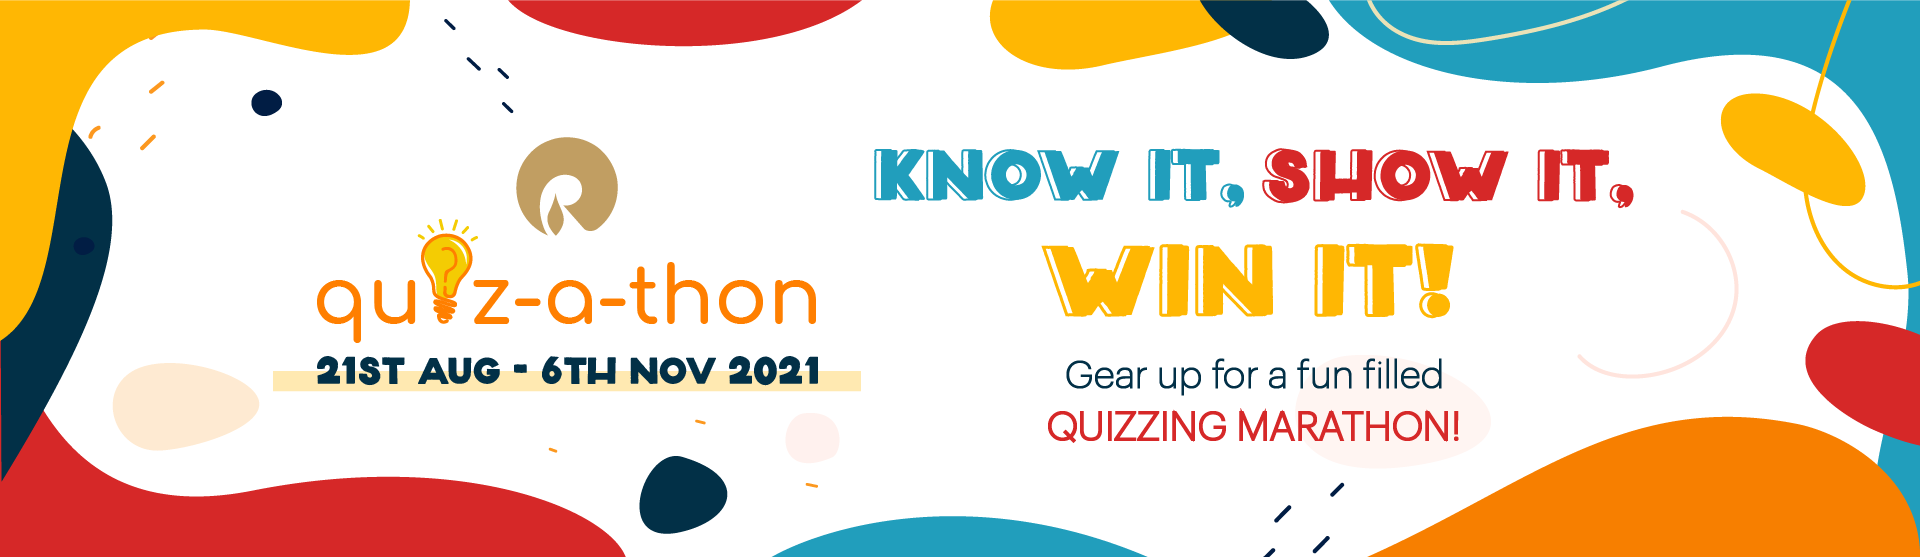 Quizzing Marathon | Quiz-a-thon 6.0 presented by Reliance, Register by Nov. 6th, 2021-Dare2Compete